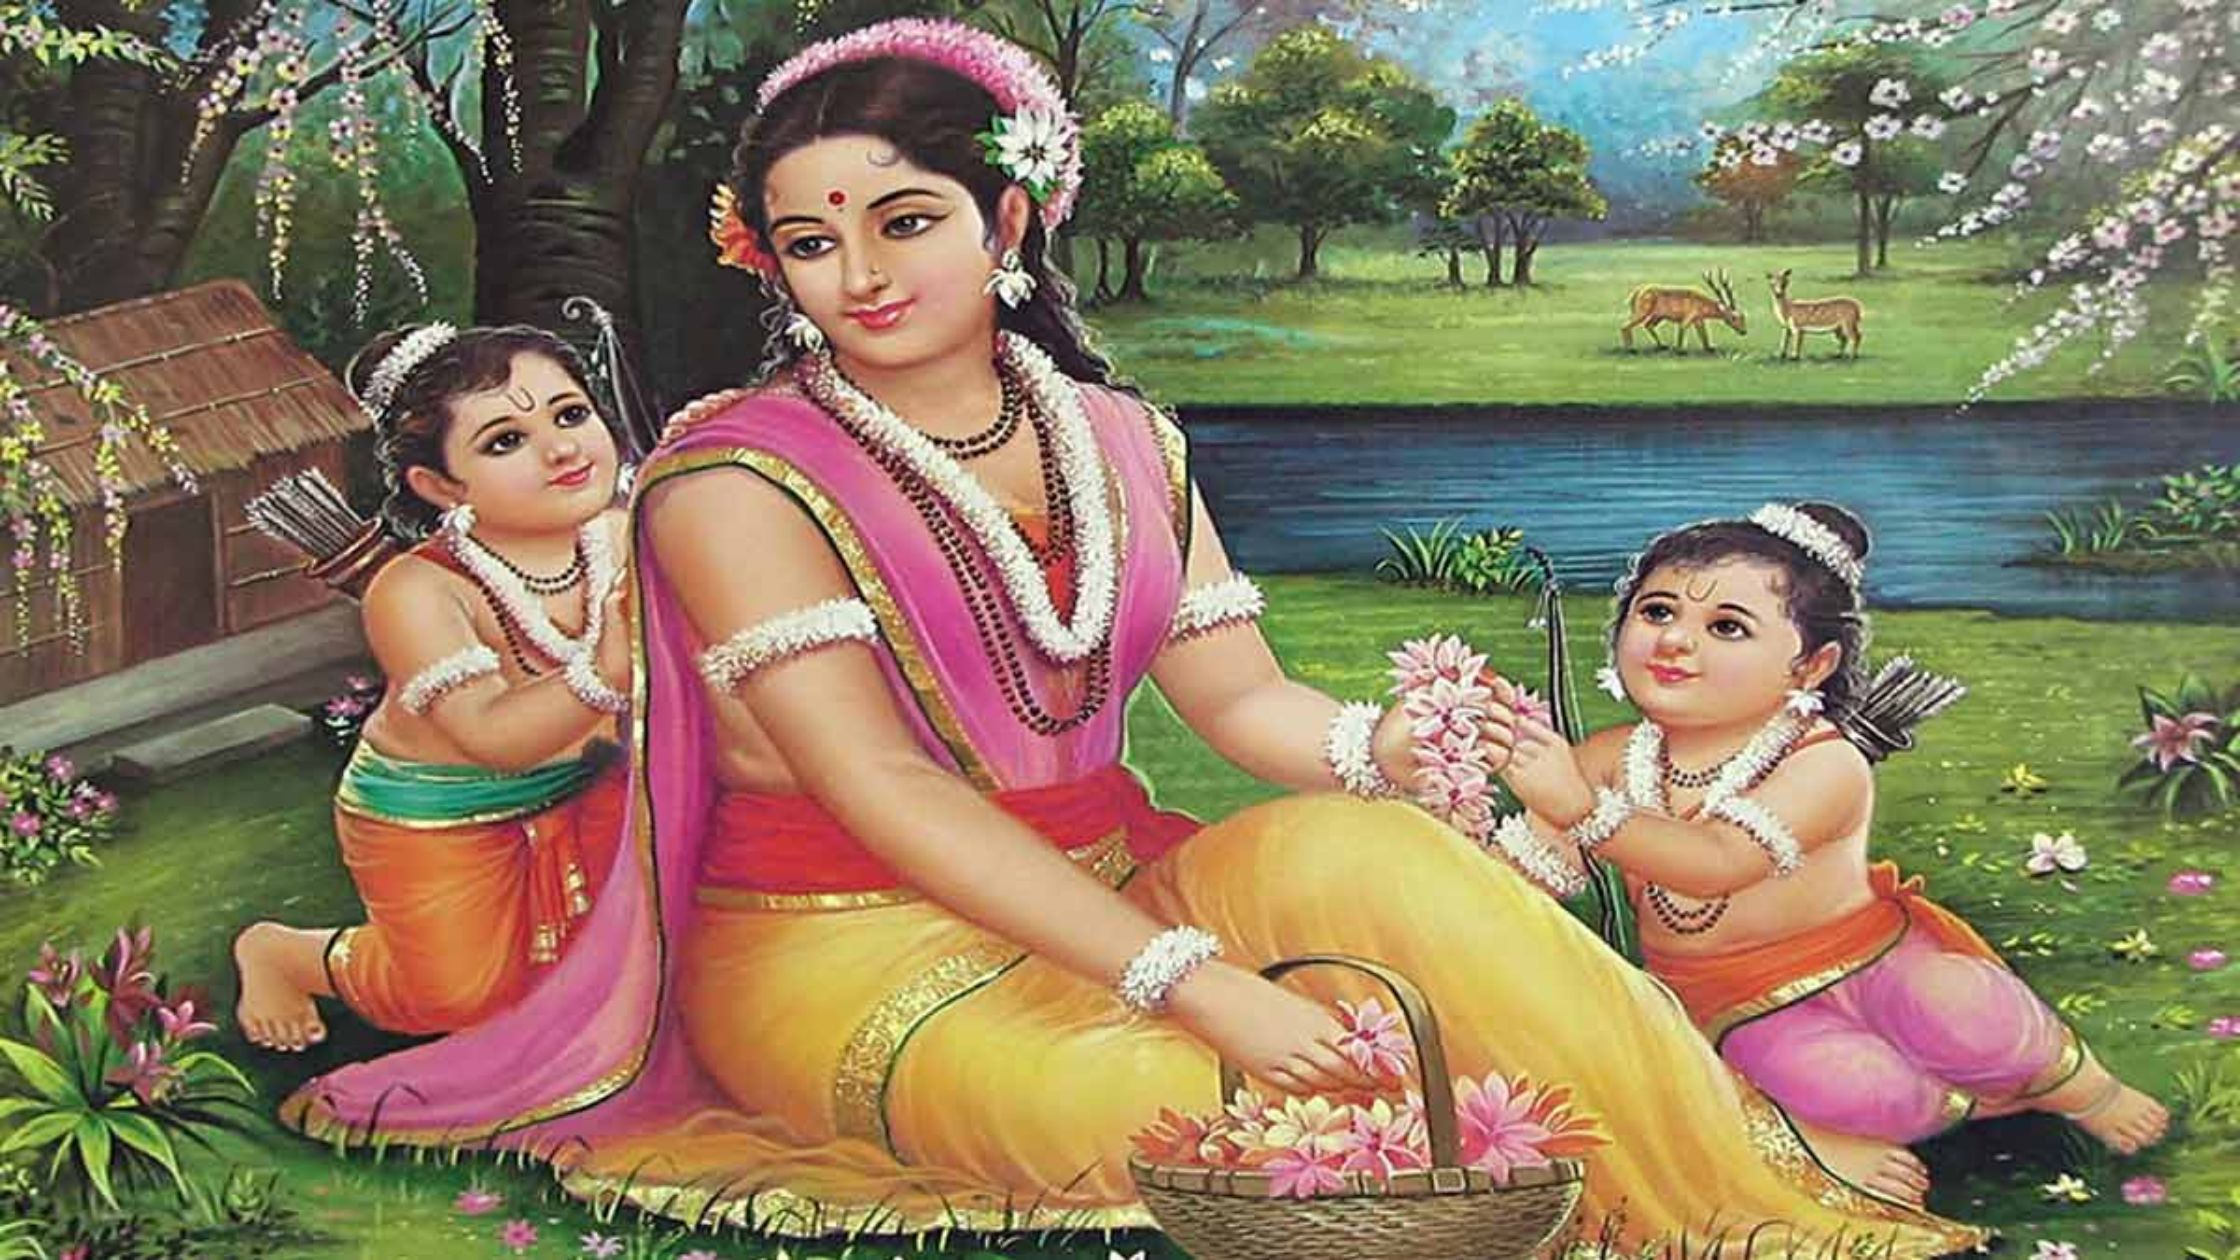 The tallest statue of Mata Sita is going to be built in Bihar